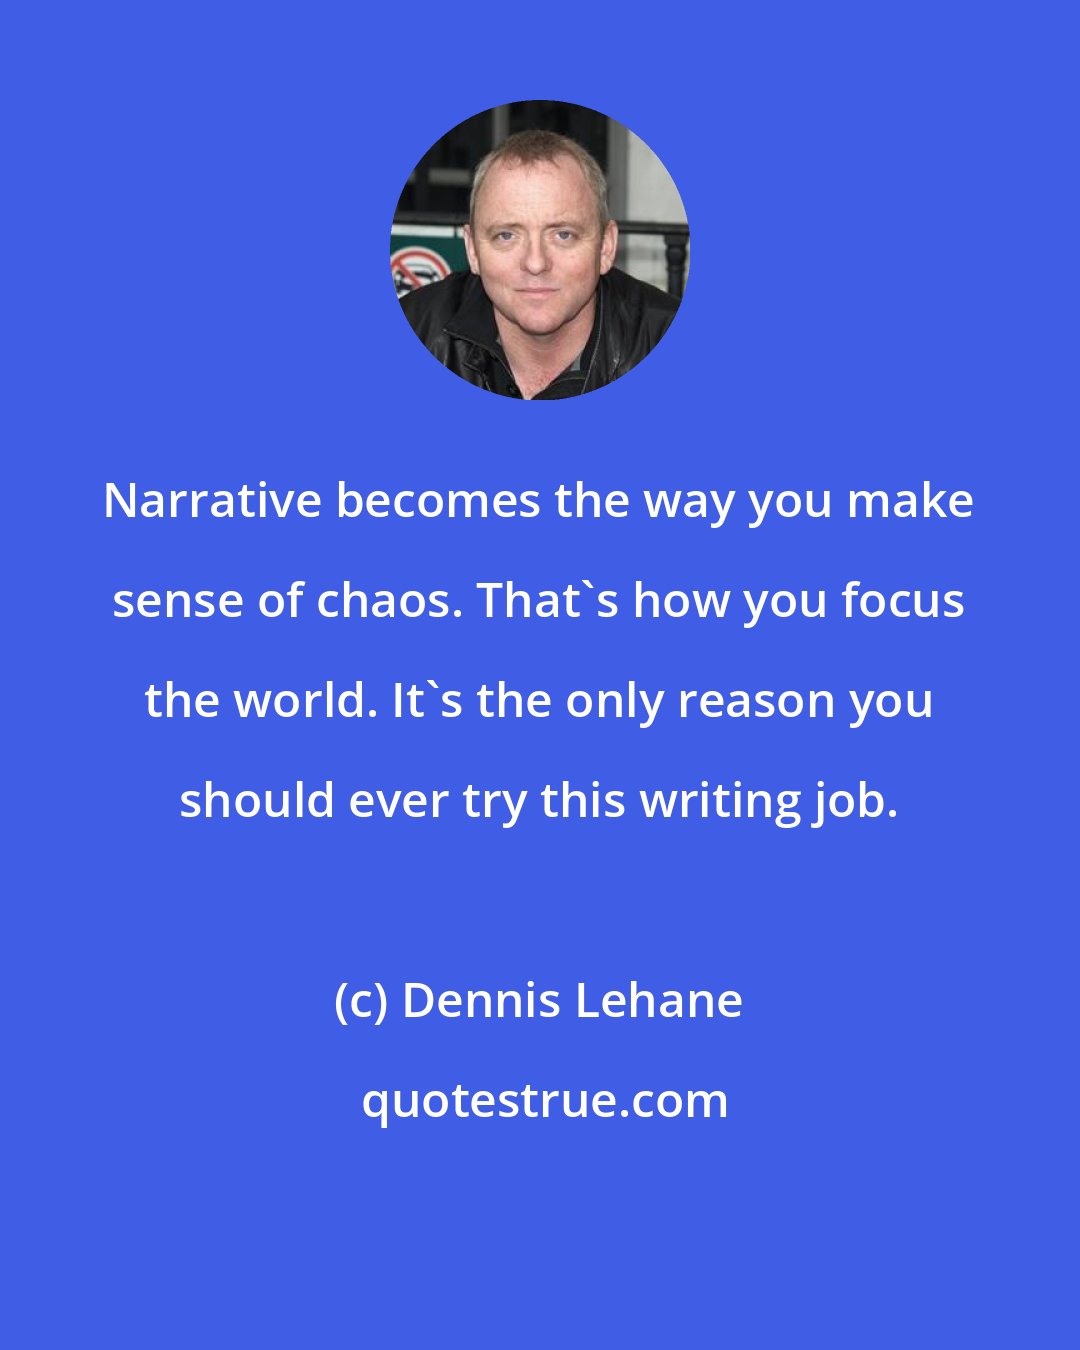 Dennis Lehane: Narrative becomes the way you make sense of chaos. That's how you focus the world. It's the only reason you should ever try this writing job.